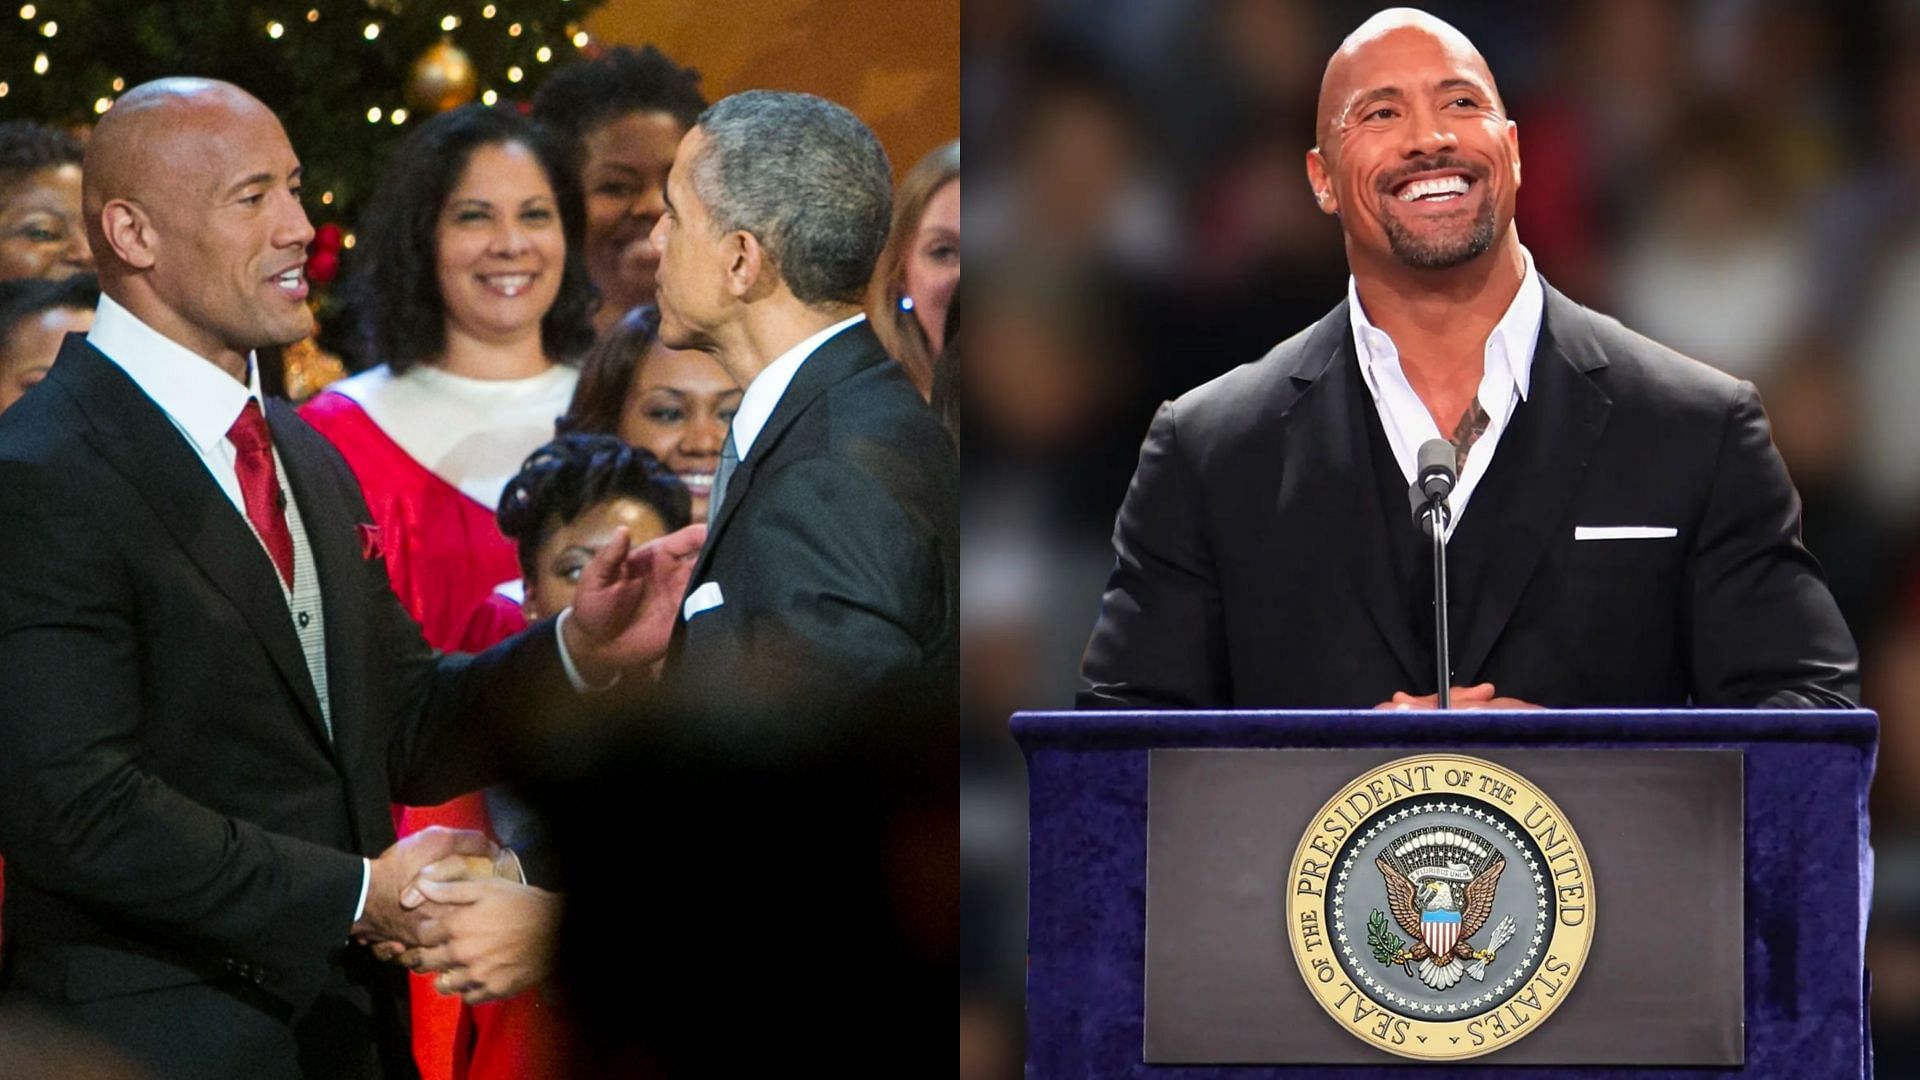 Will Dwayne Johnson (The Rock) run for President of the United States in 2024?